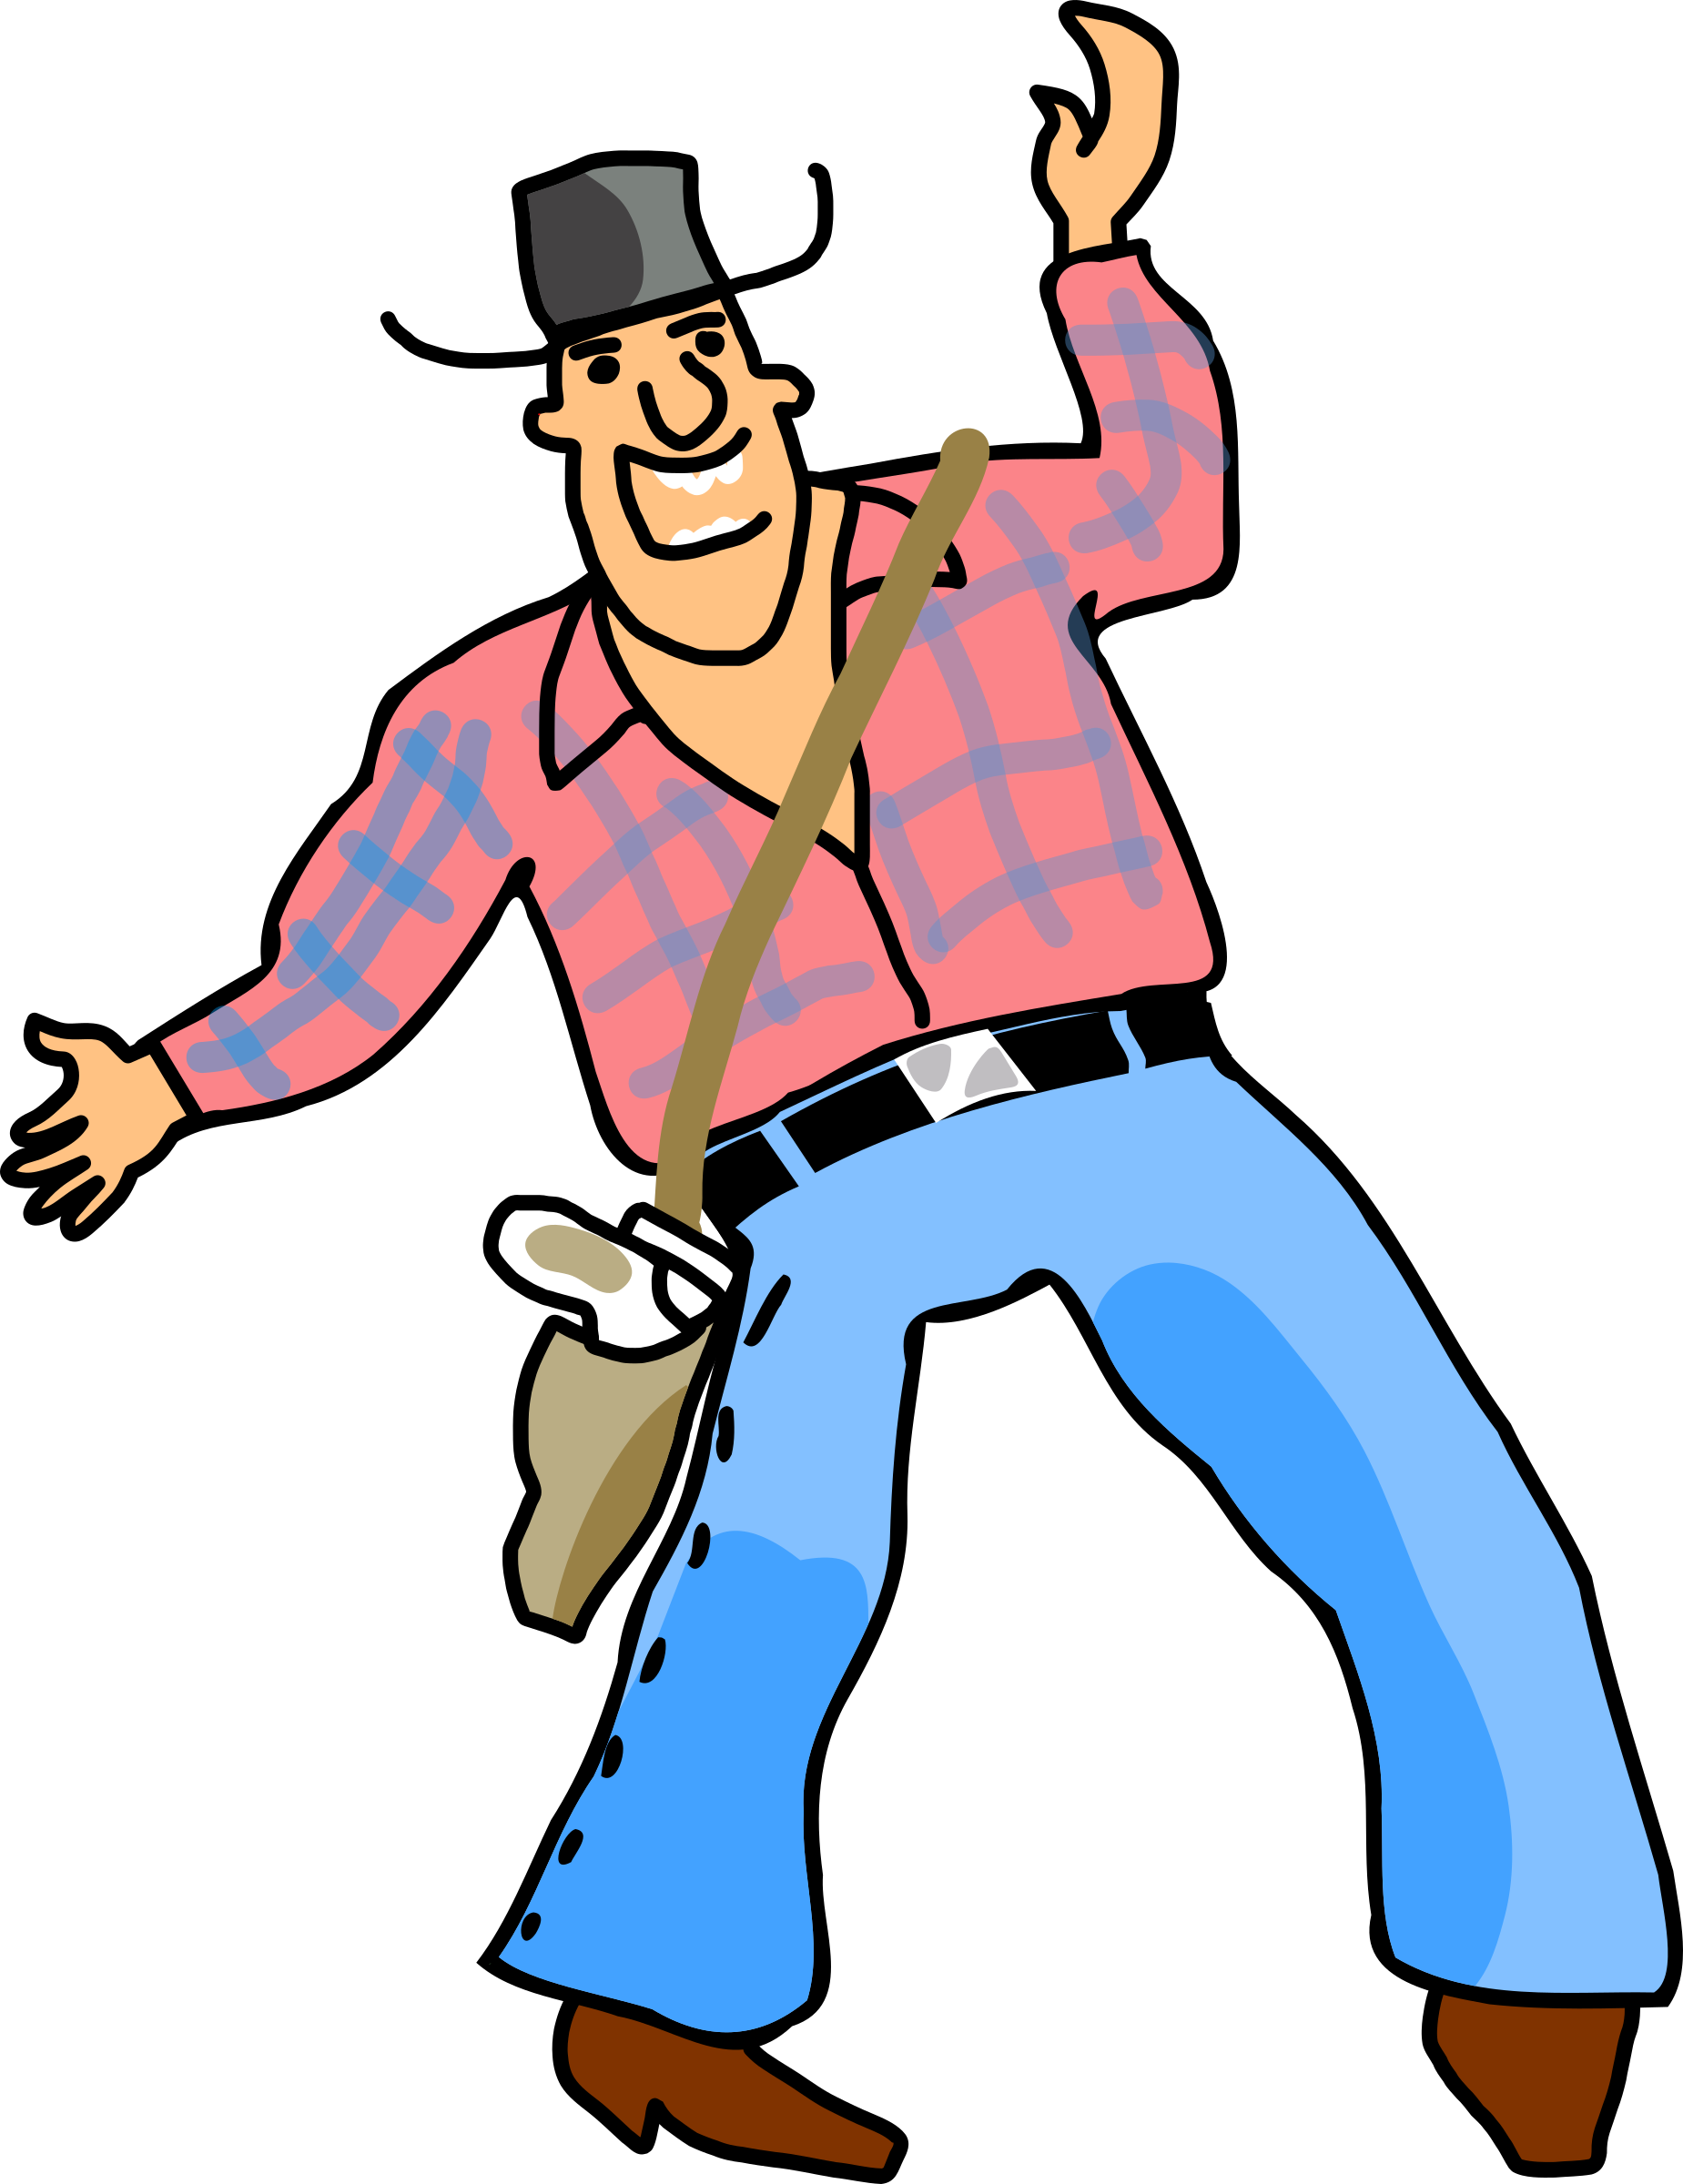 A Cartoon Of A Man With A Hat And A Belt